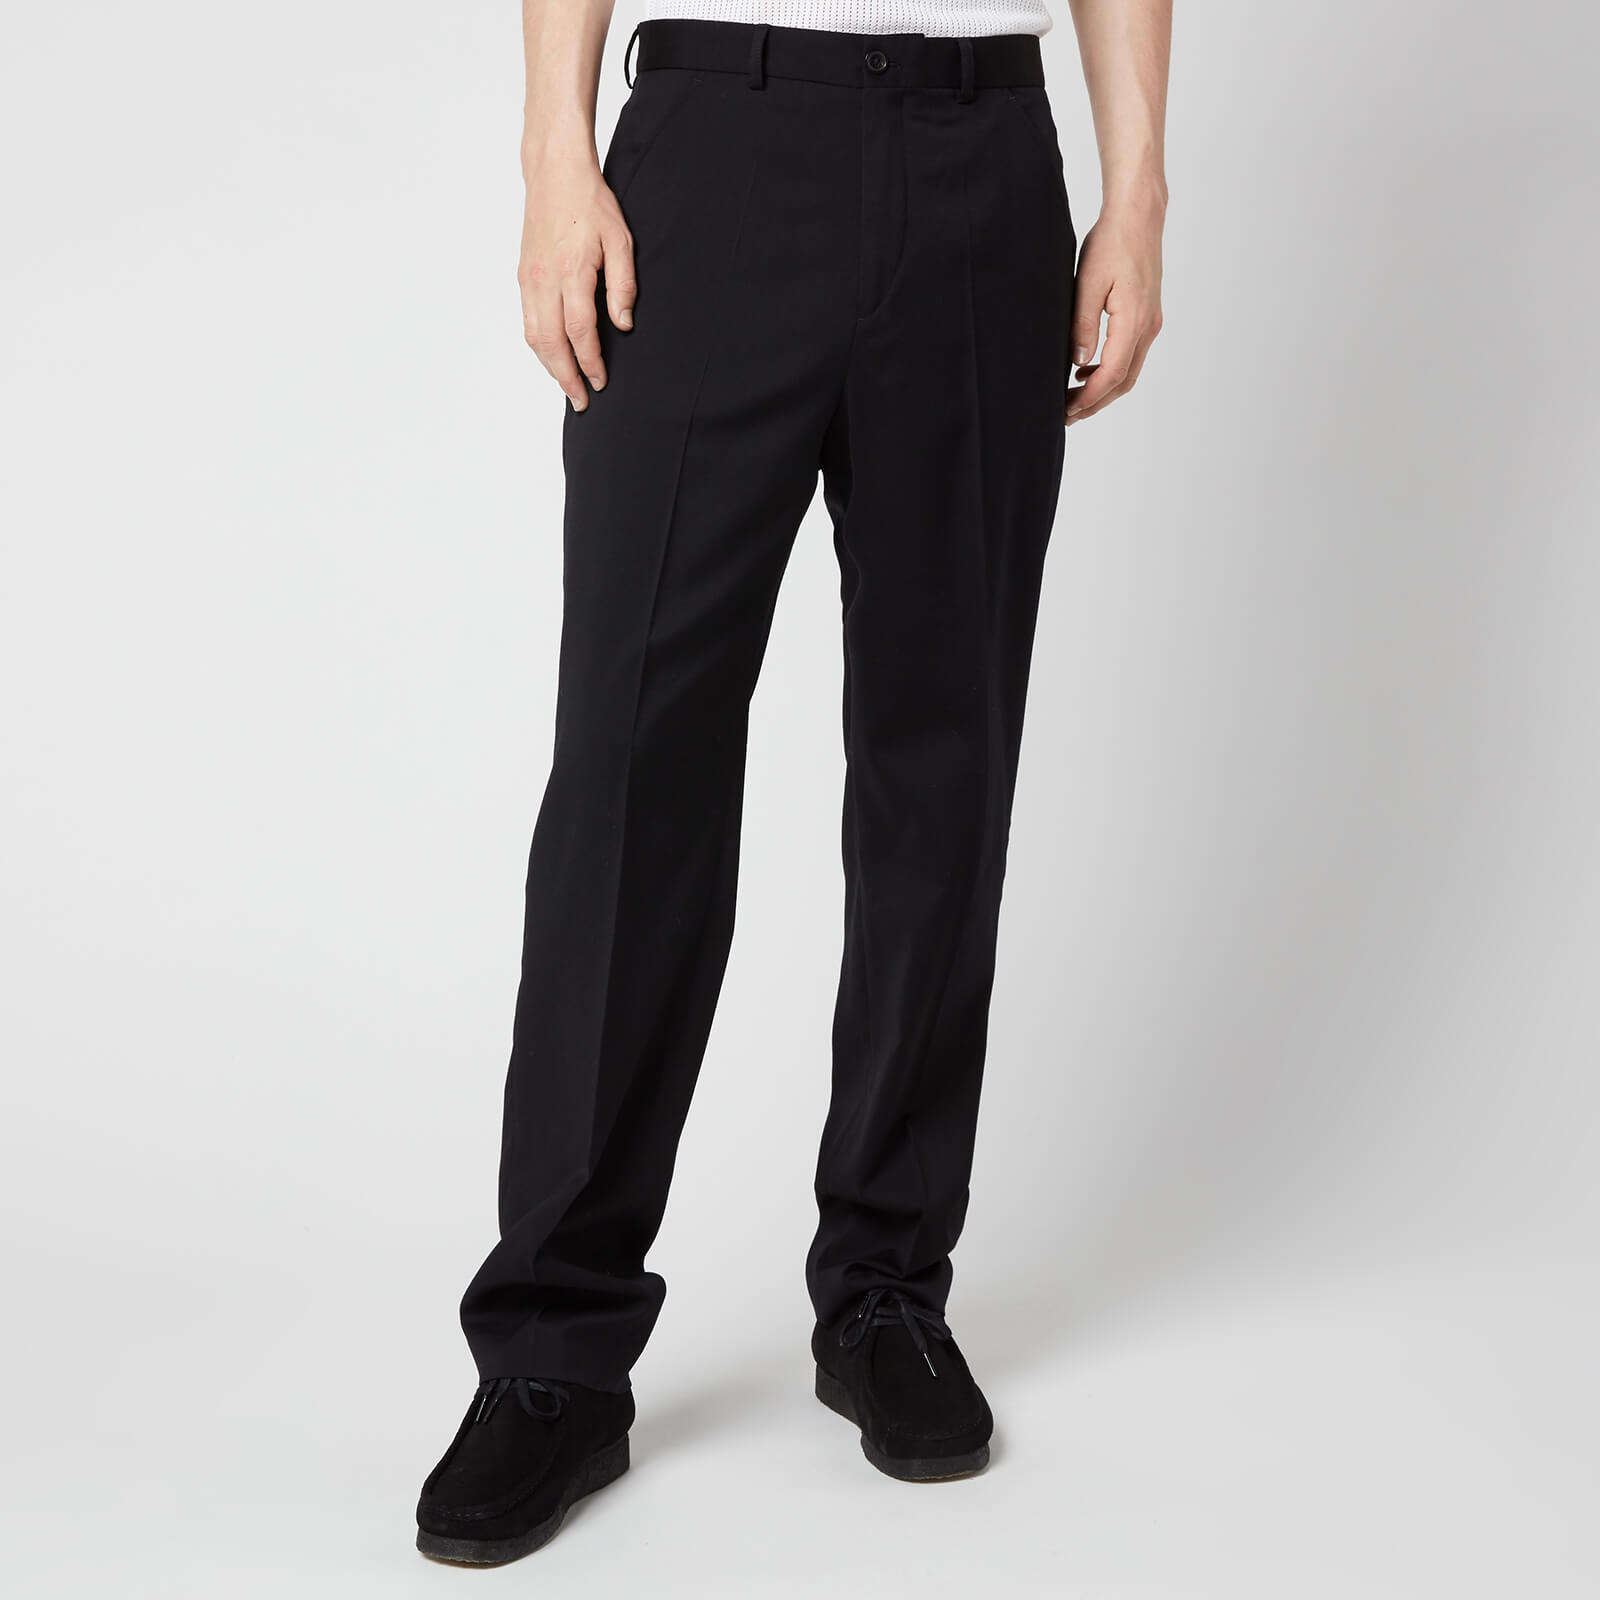 Our Legacy Men's Chinos - Black Worsted Wool - 50/L